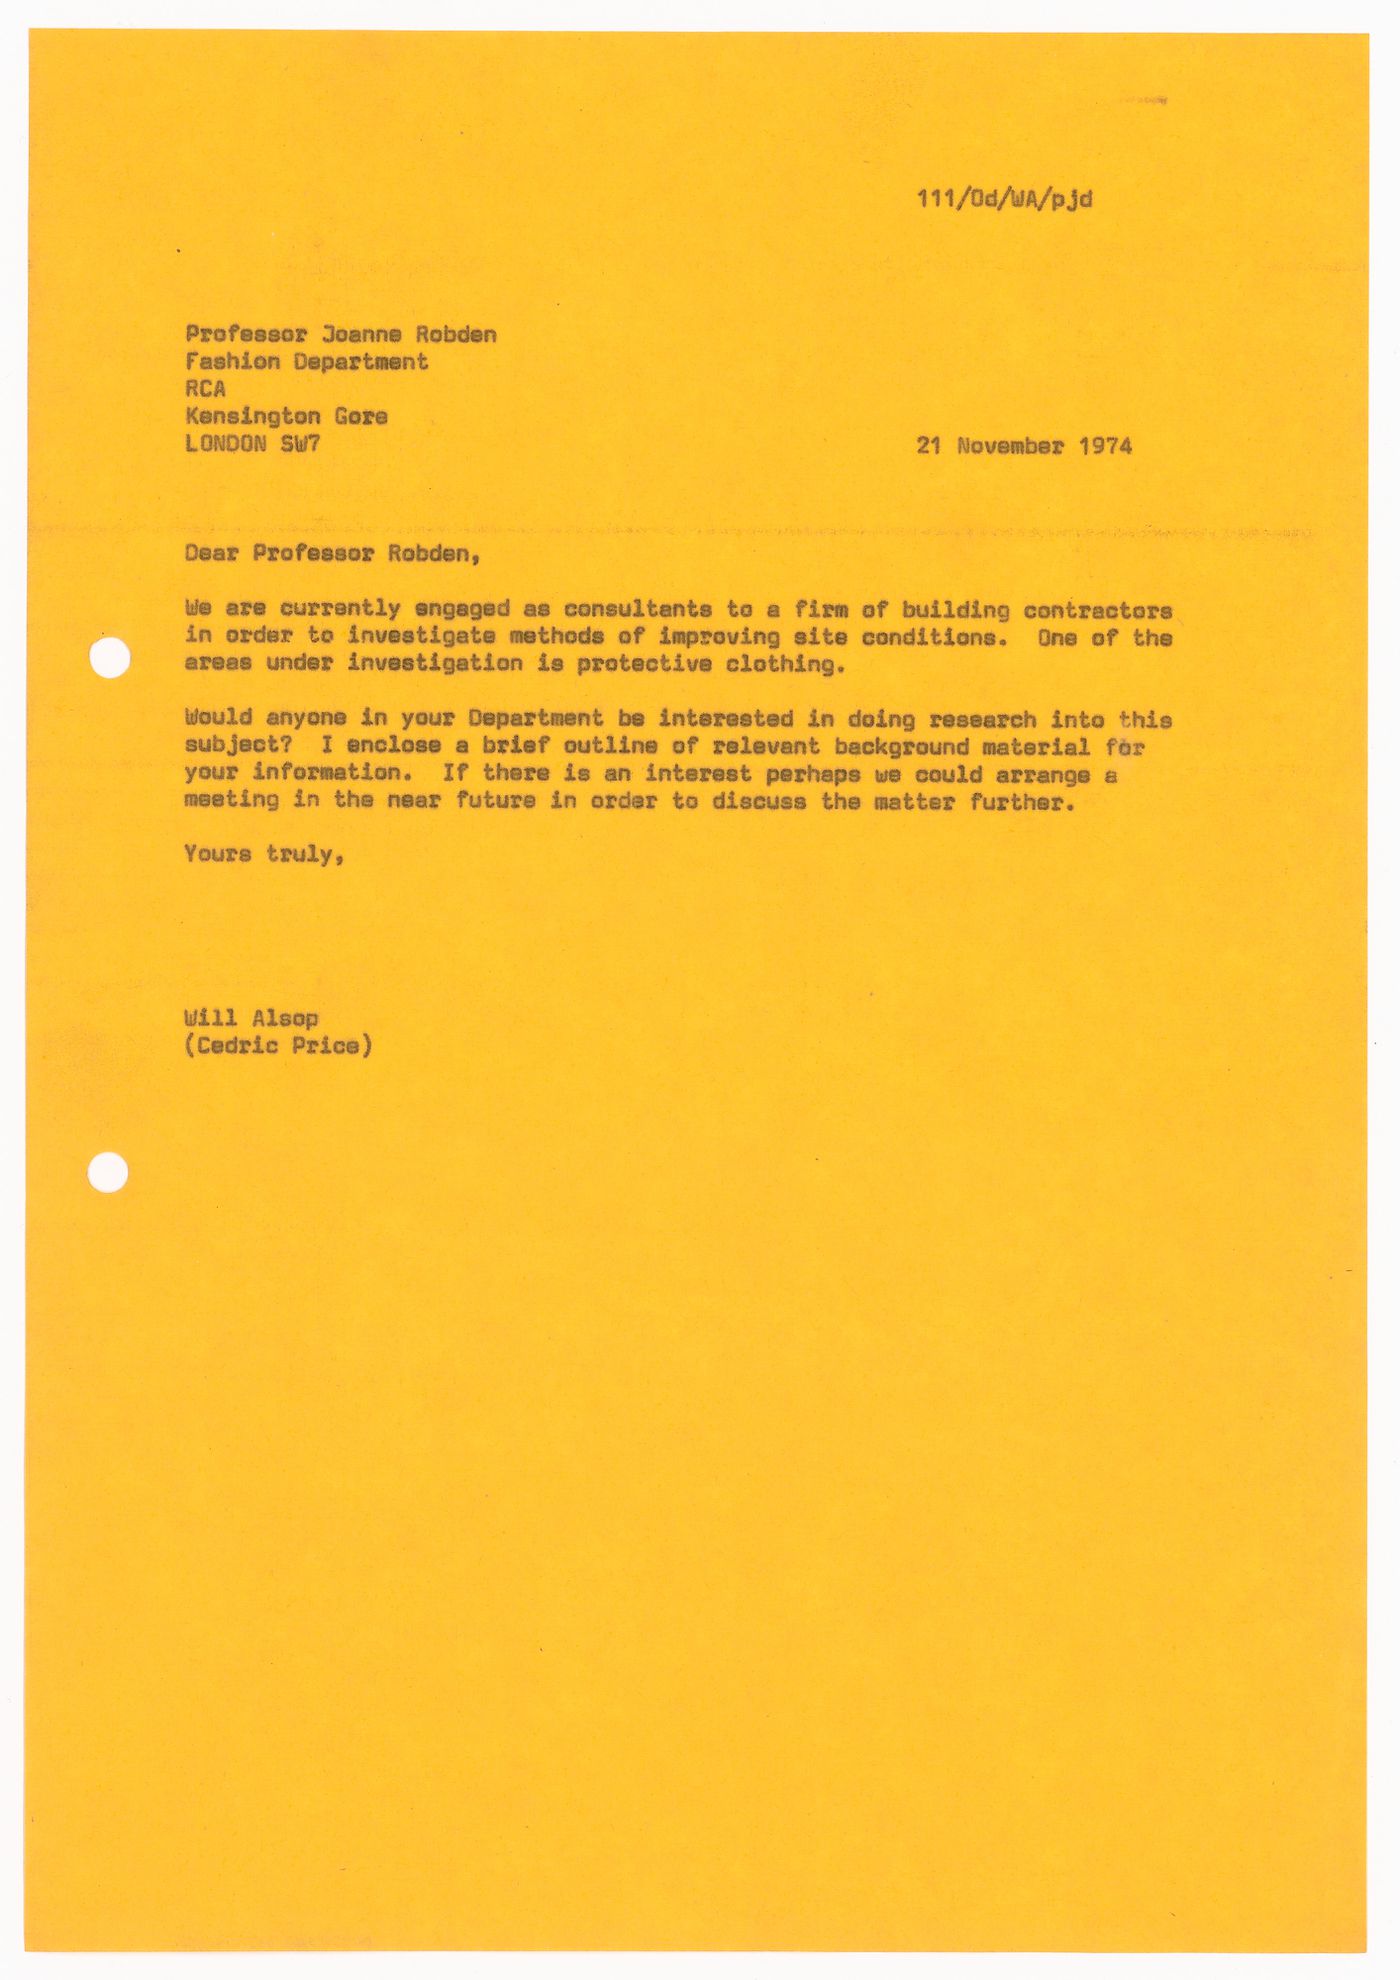 Letter from Will Alsop of the office of Cedric Price to Professor Joanne Robden of the Royal College of Art concerning research on protective clothing in conjunction with the McAppy project